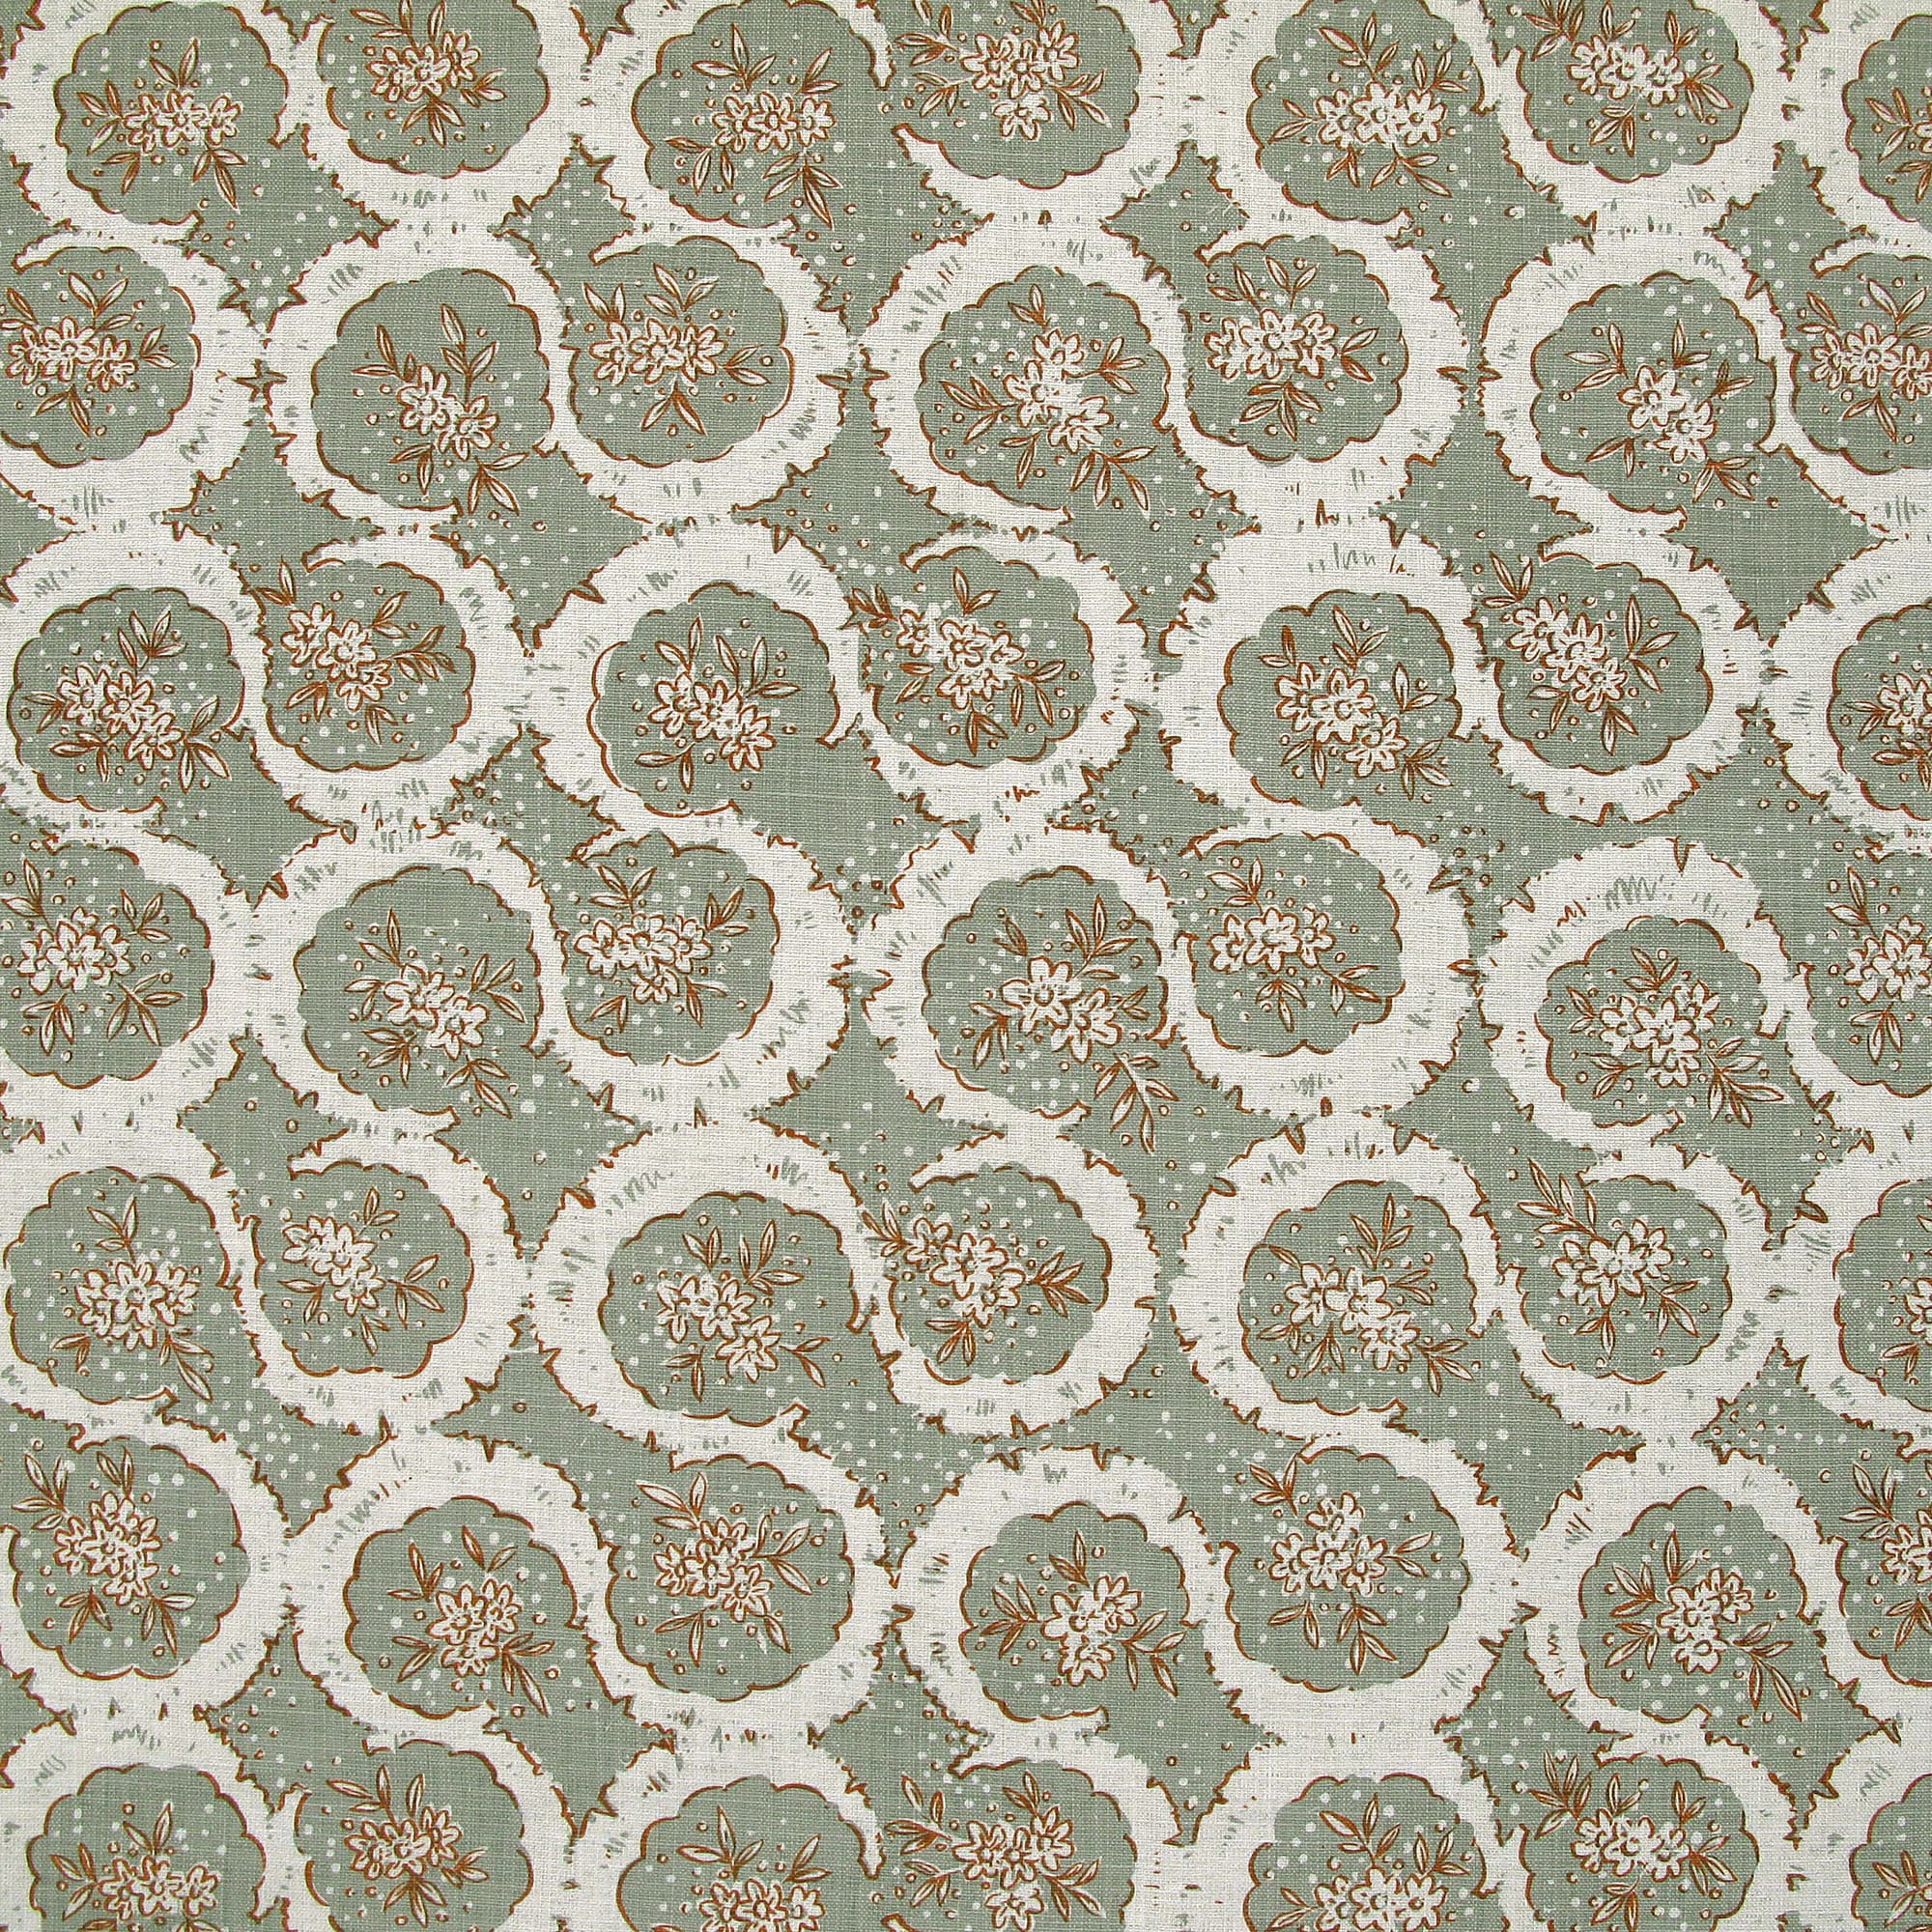 Detail of fabric in a meandering floral grid print in white and brown on a light green field.